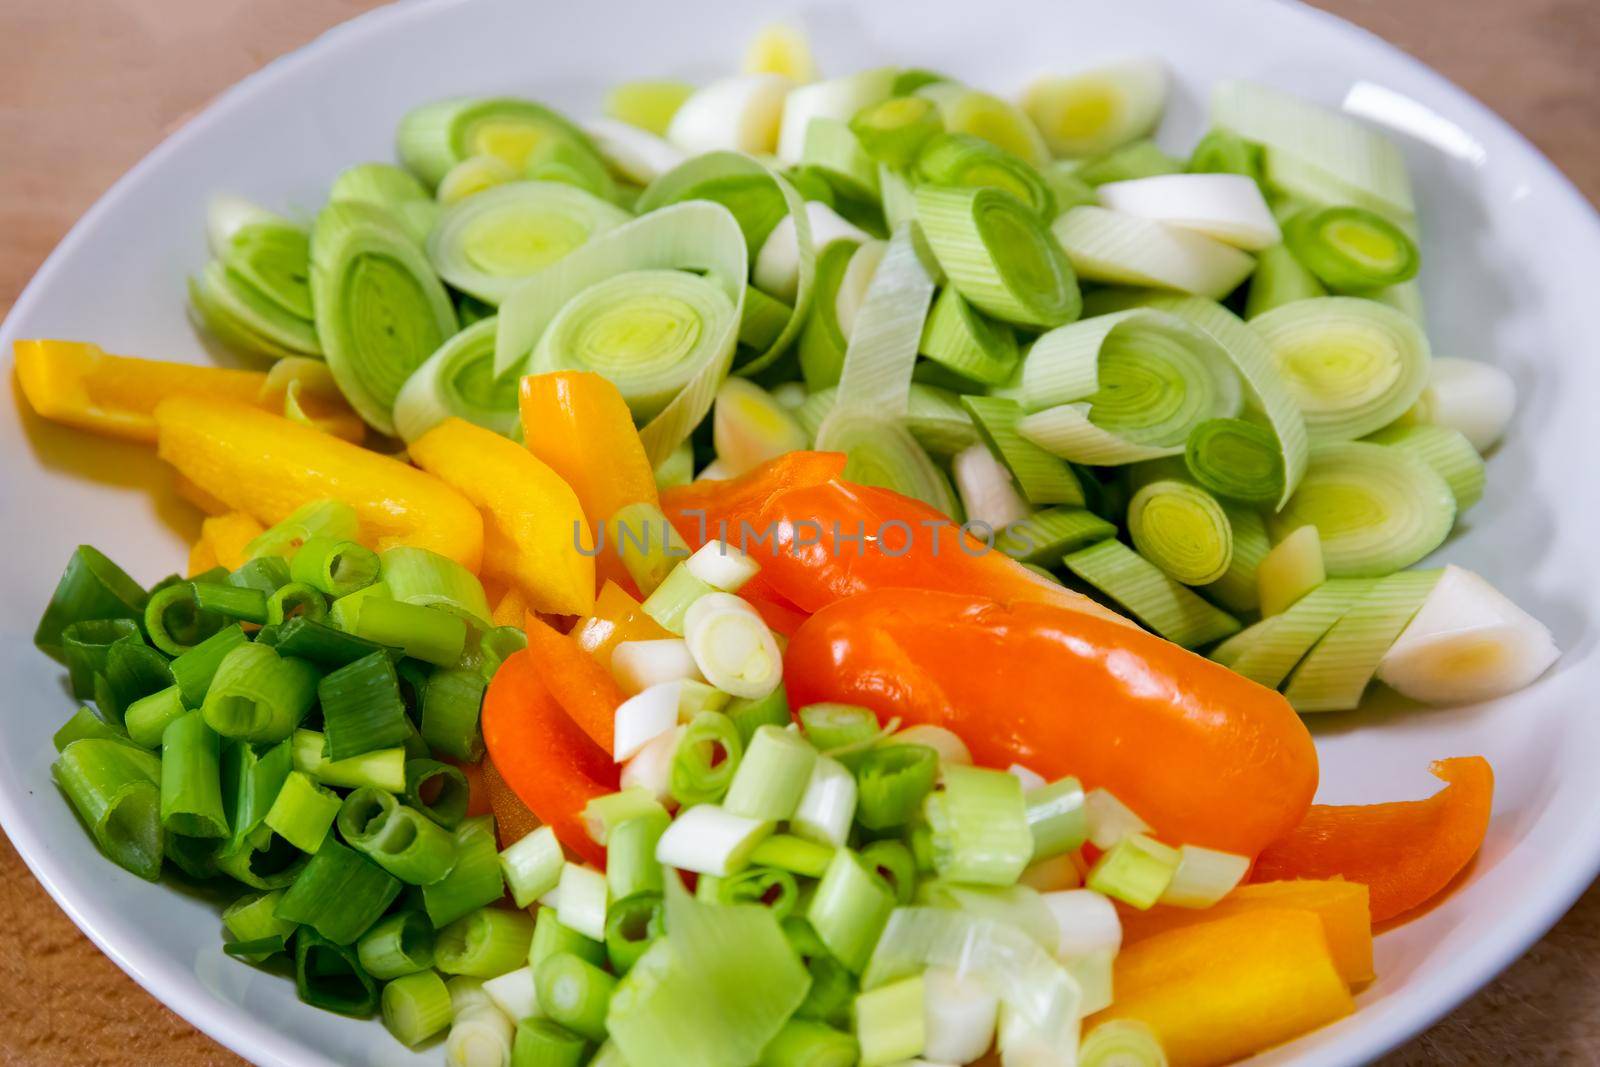 Sliced leeks, peppers and spring onions in a white bowl